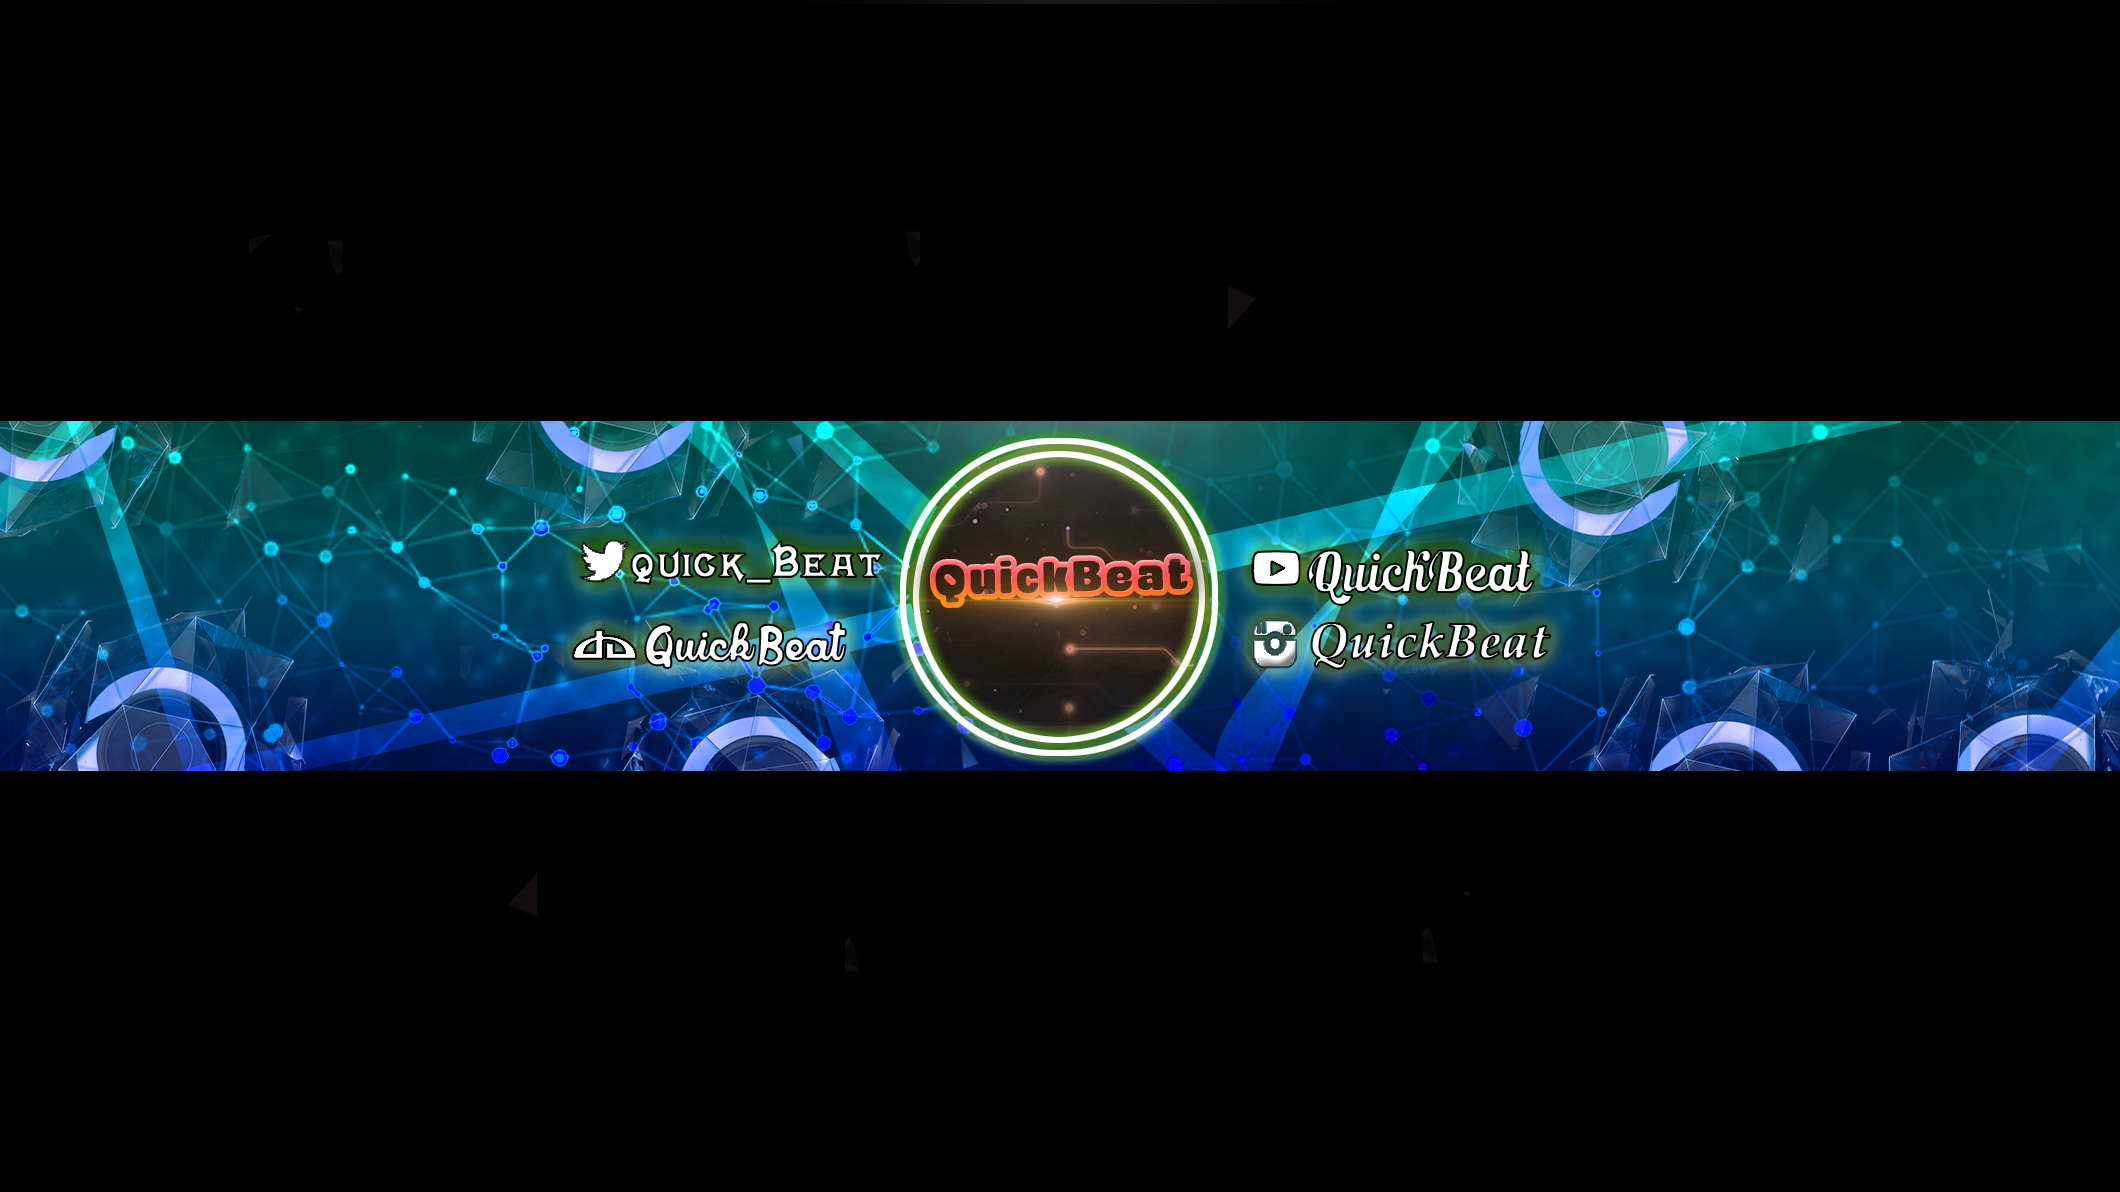 Youtube Channel Background 2 by QuickBeat on DeviantArt